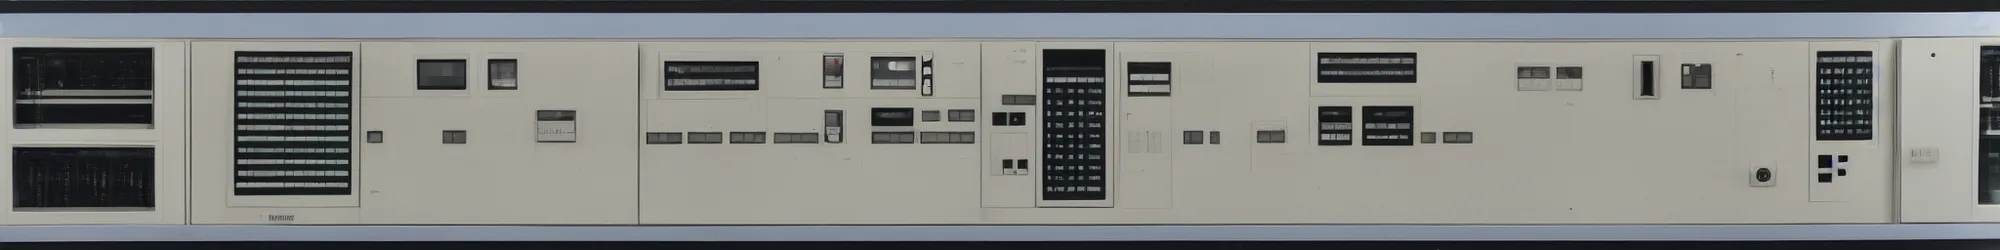 Prompt: 1972 mainframe computer control panel designed by dieter rams